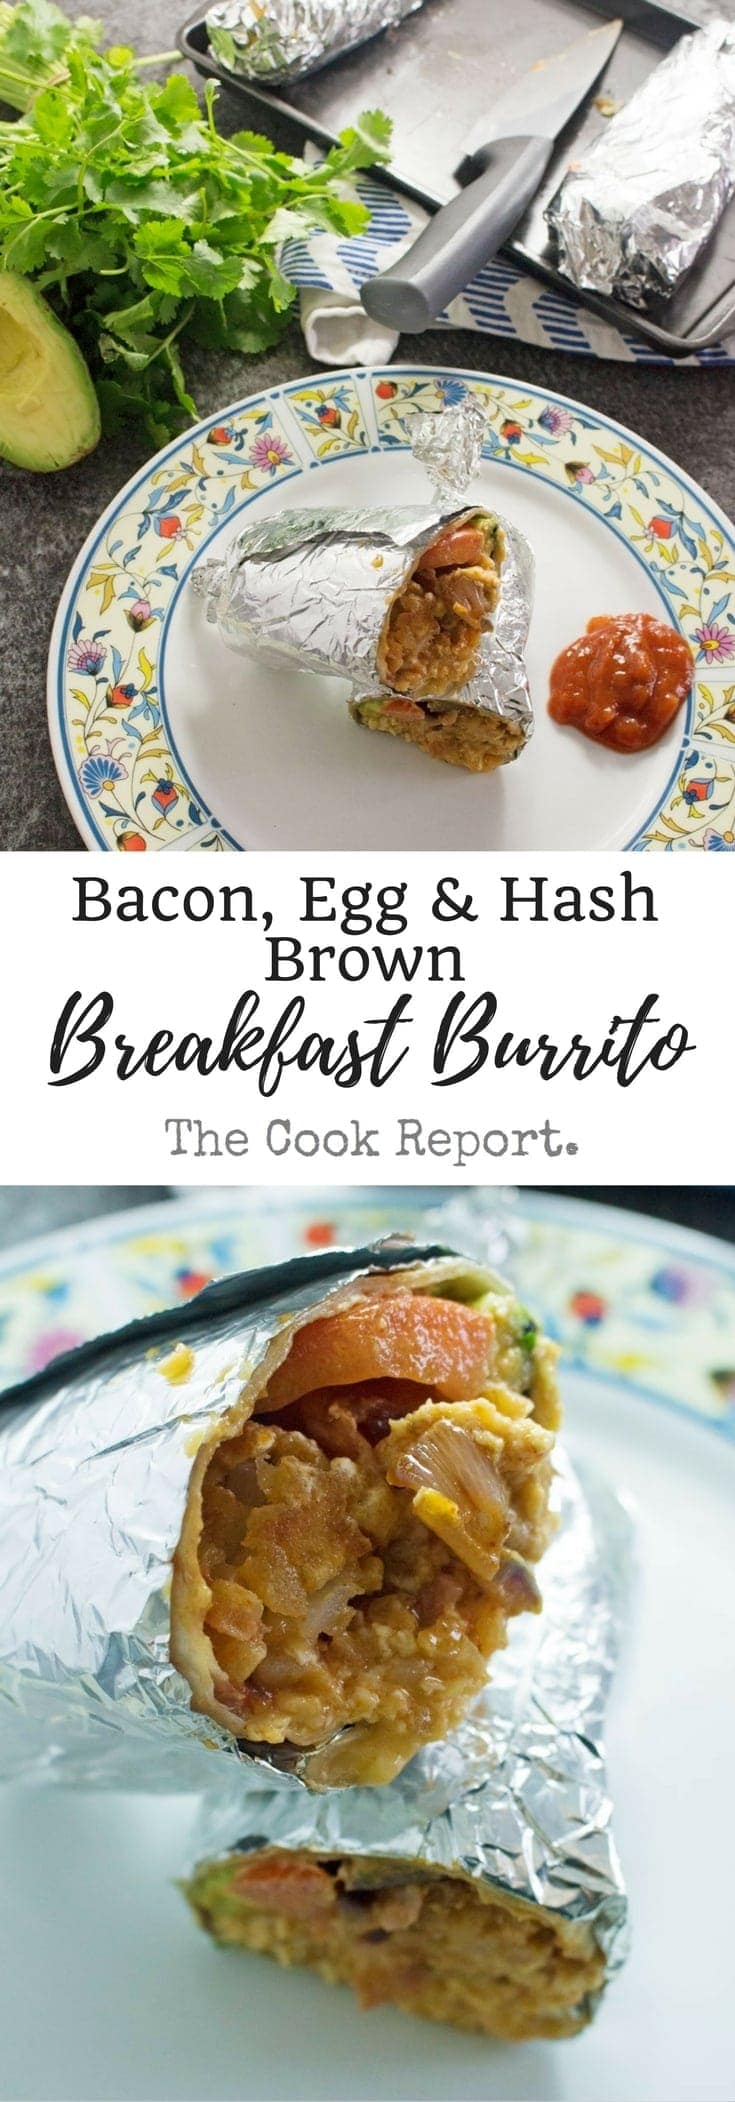 These breakfast burritos stuffed with bacon, egg and hash browns give you the perfect start to the day! They're an impressive but easy to make breakfast.